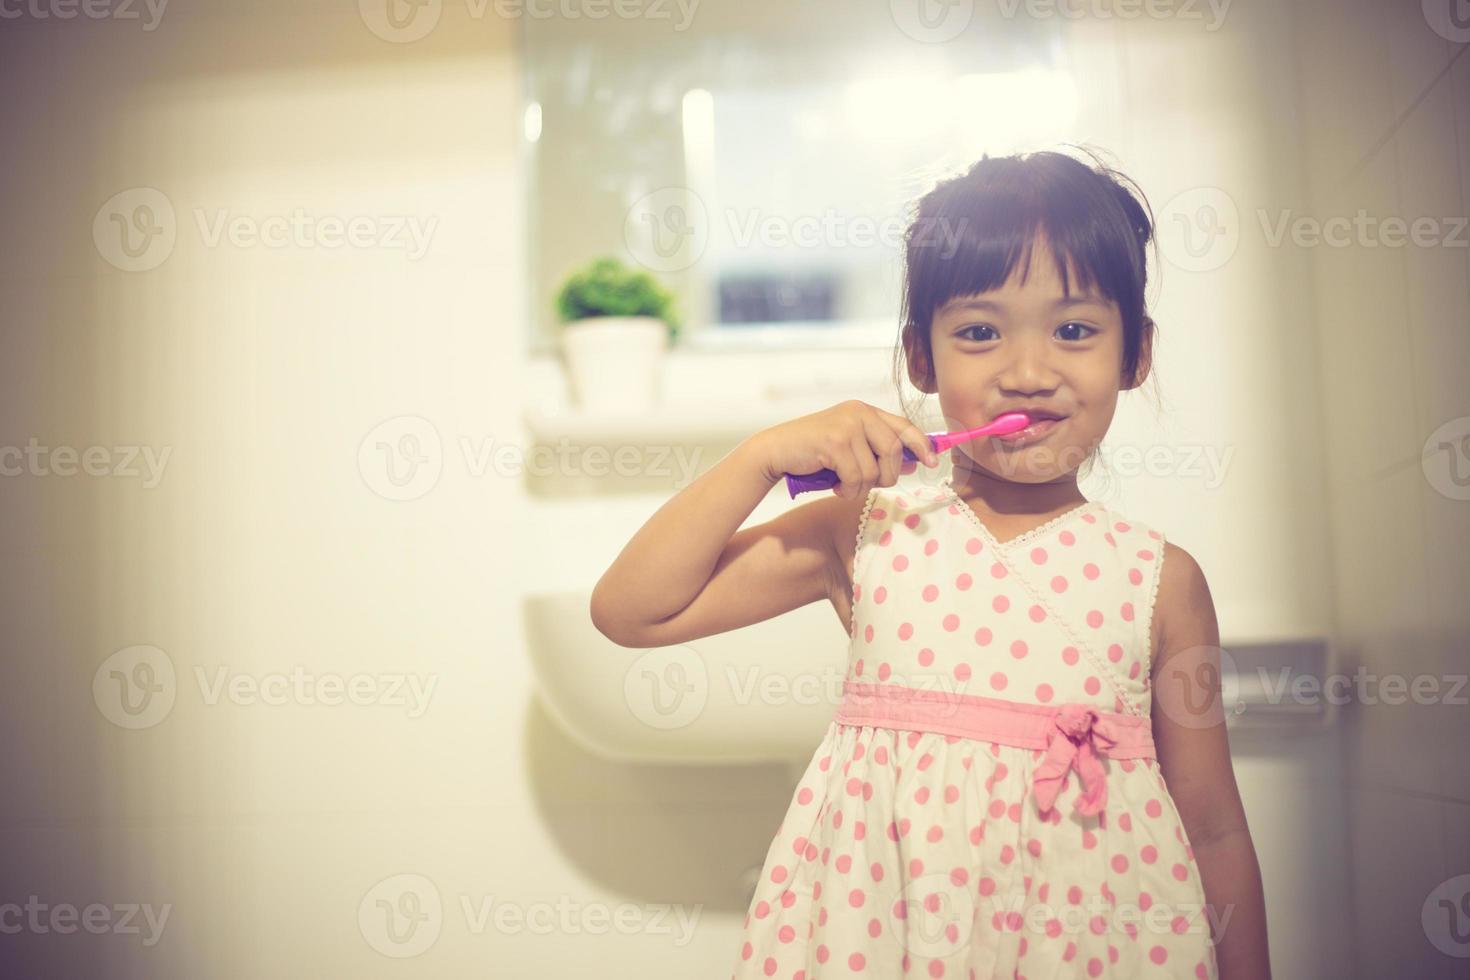 Little cute baby girl cleaning her teeth with toothbrush in the bathroom photo